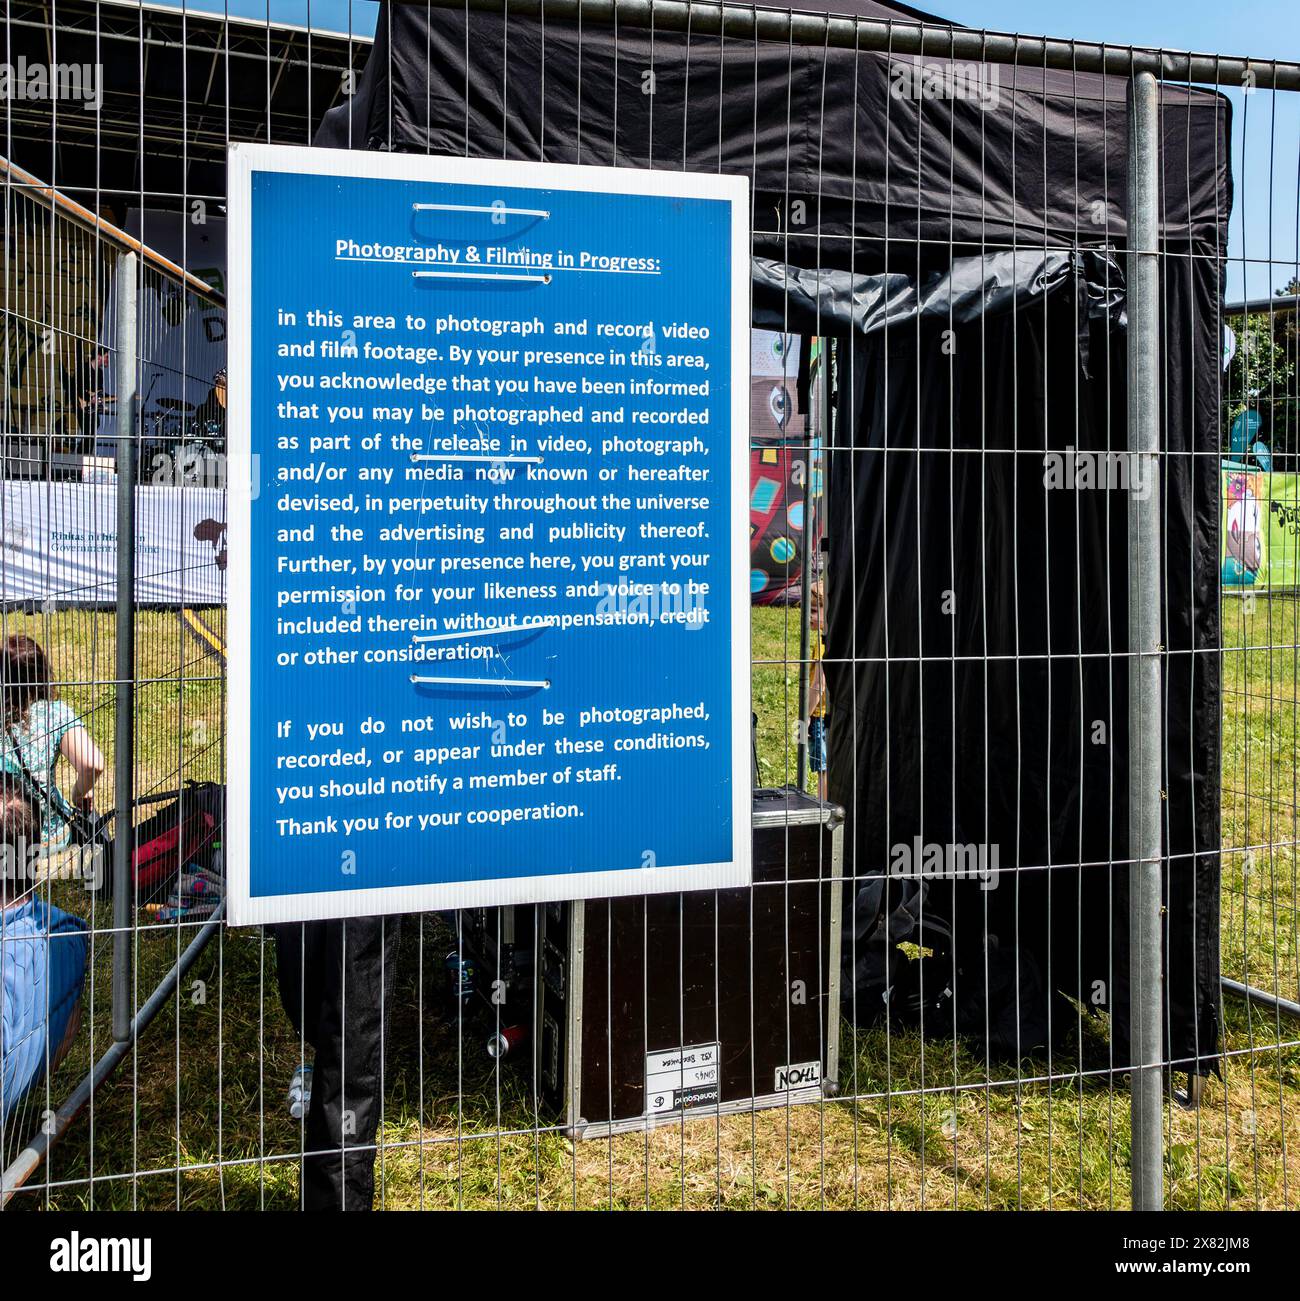 Signage at Outdoor Event Highlighting Photography and Filming Regulations at a public event in Dublin, Ireland. Stock Photo